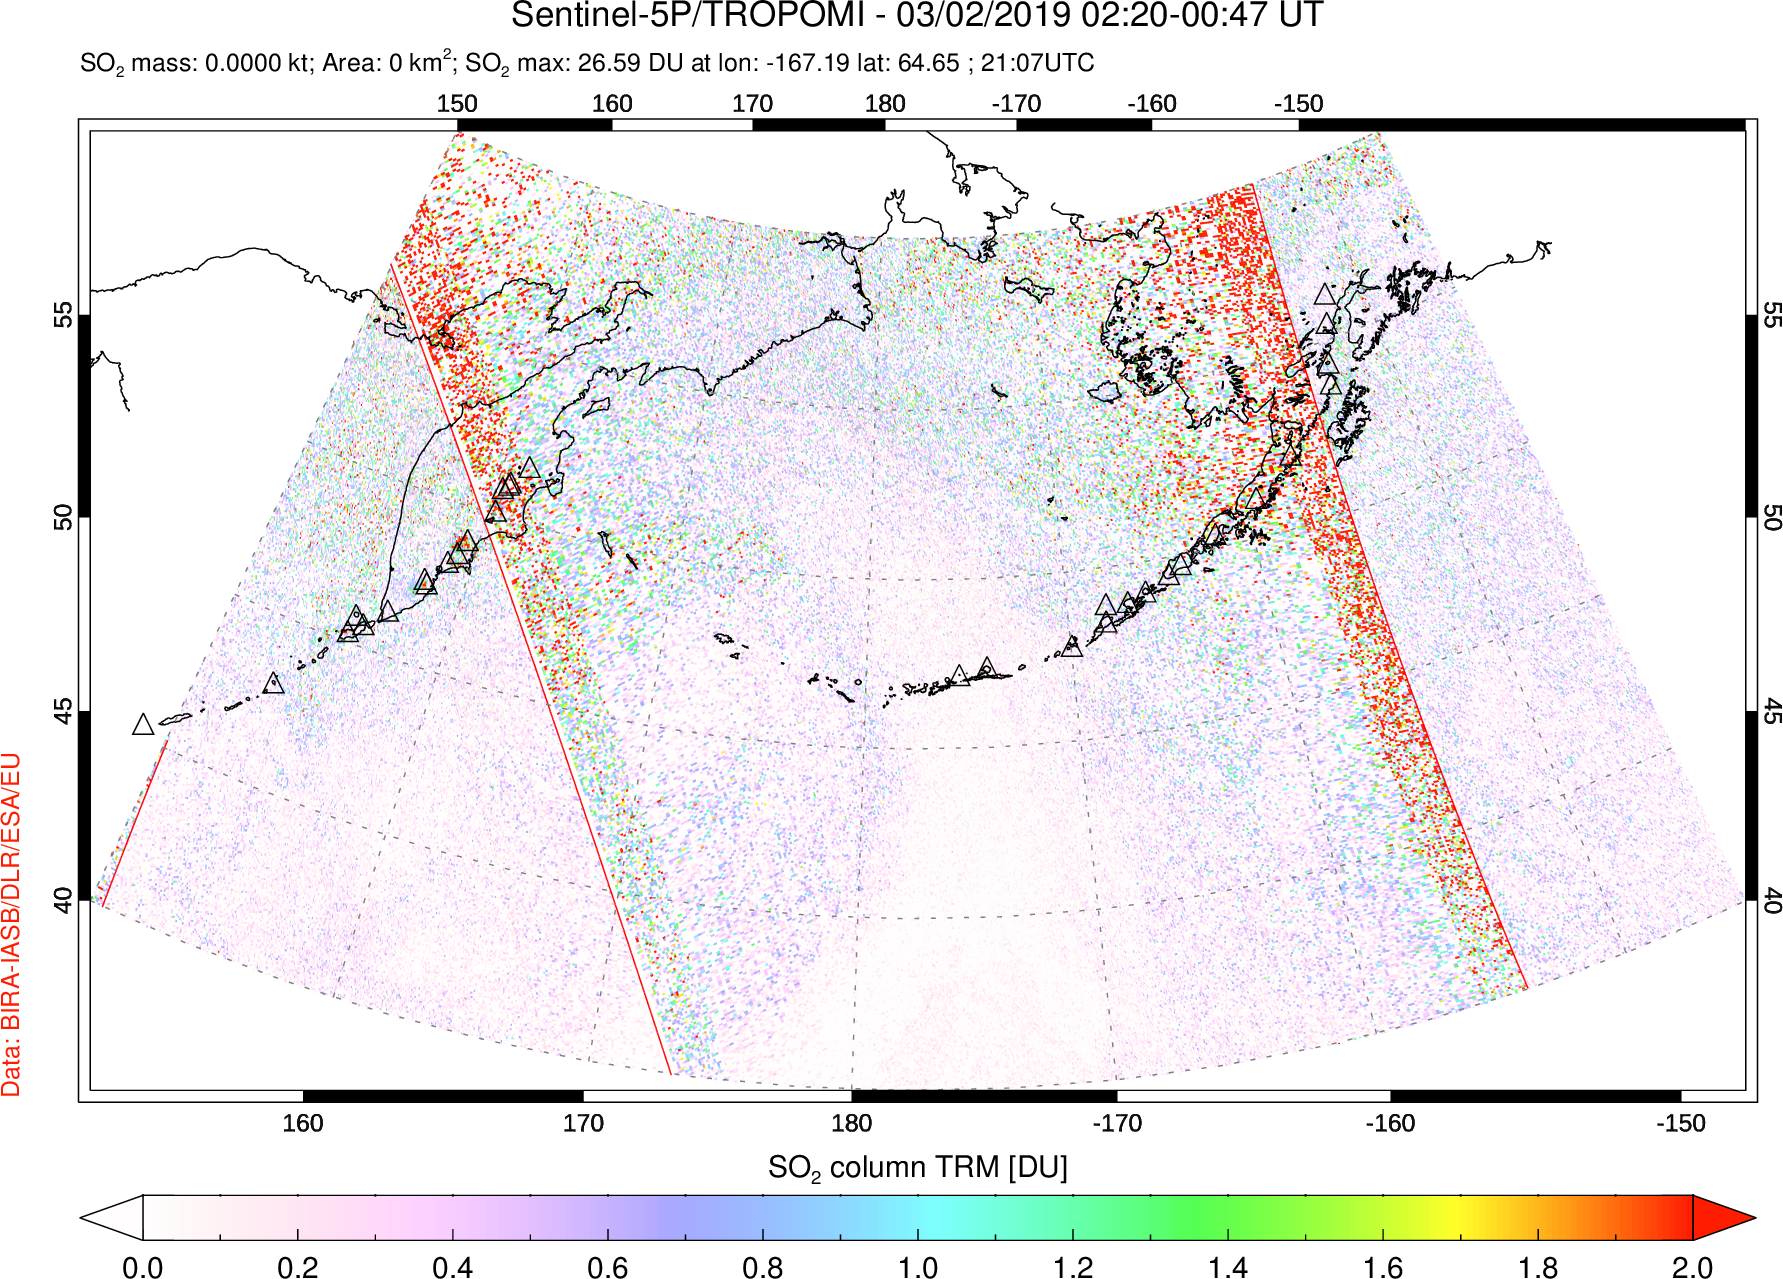 A sulfur dioxide image over North Pacific on Mar 02, 2019.